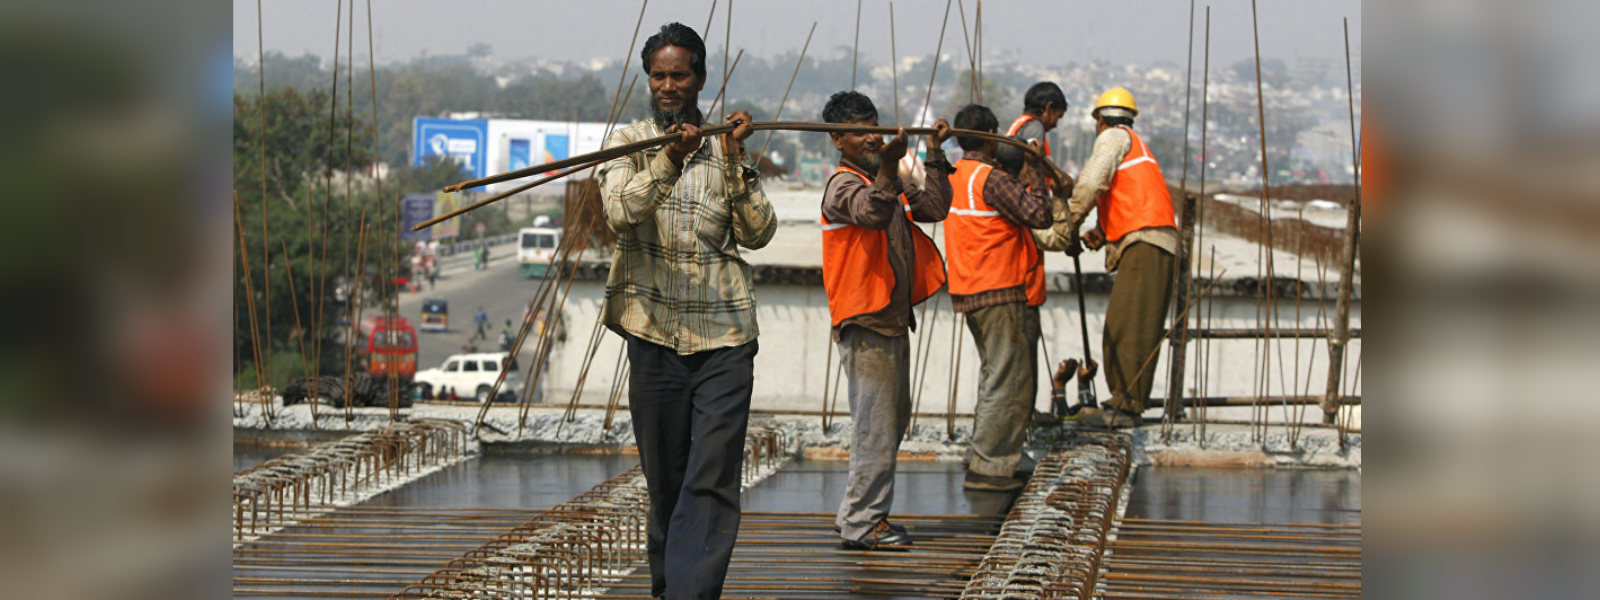 India’s unemployment rate hikes to 6.1%